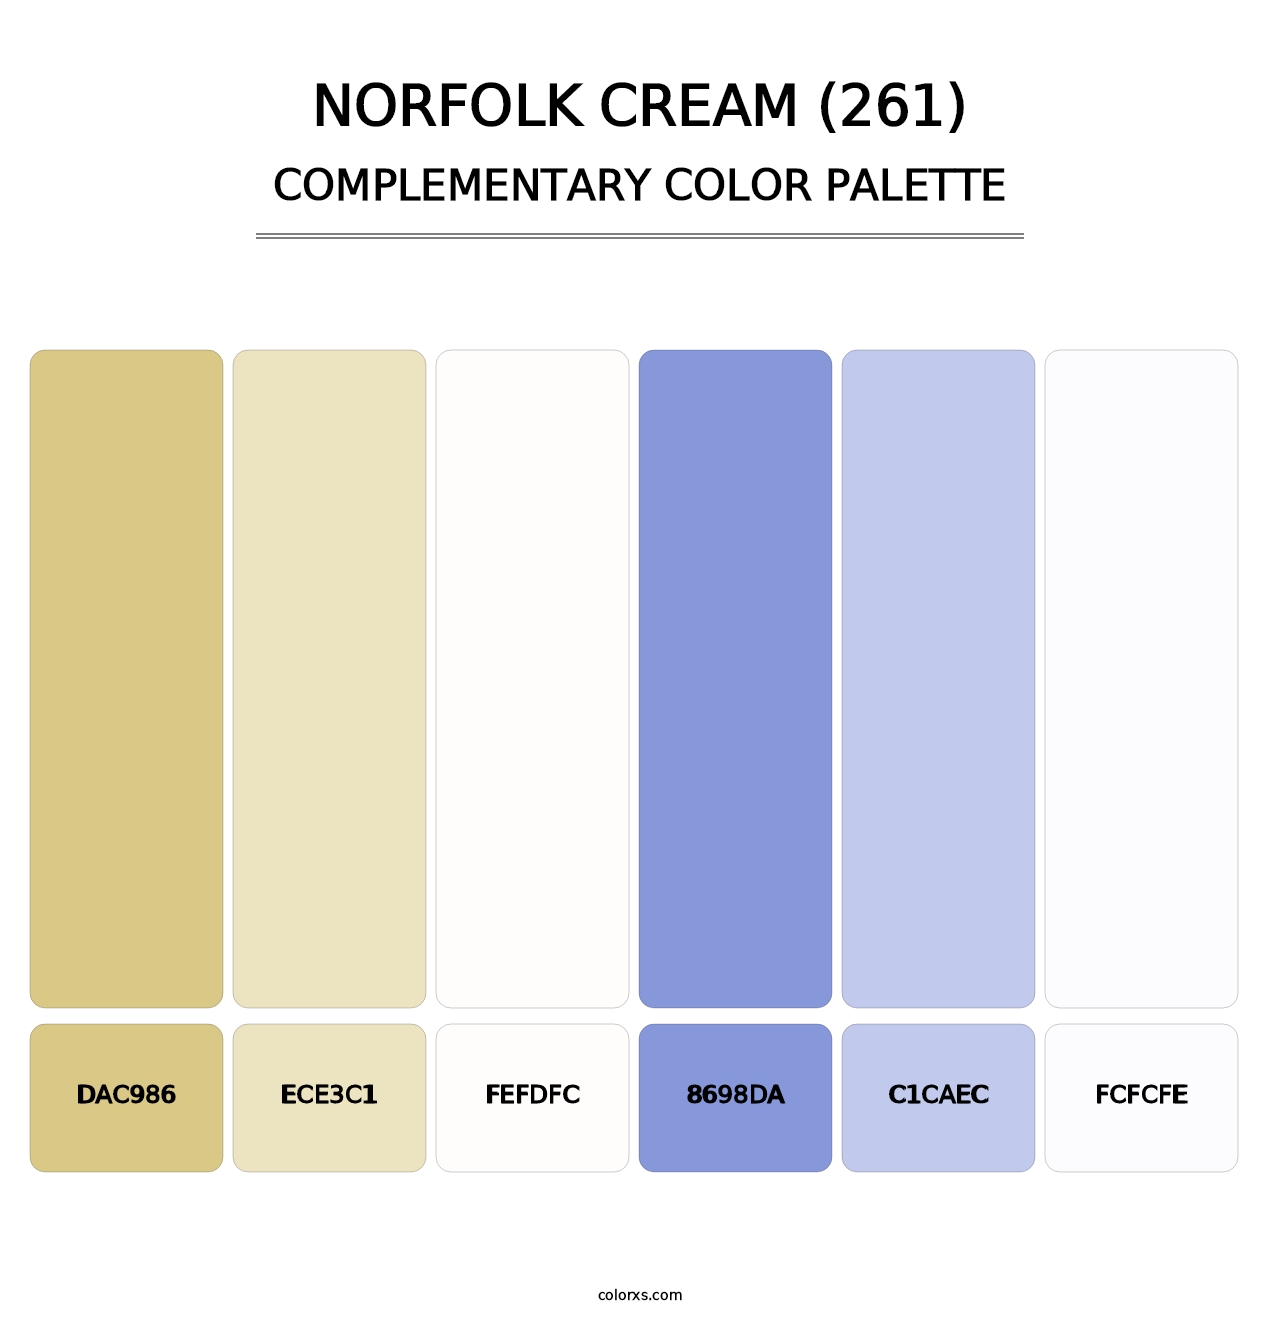 Norfolk Cream (261) - Complementary Color Palette